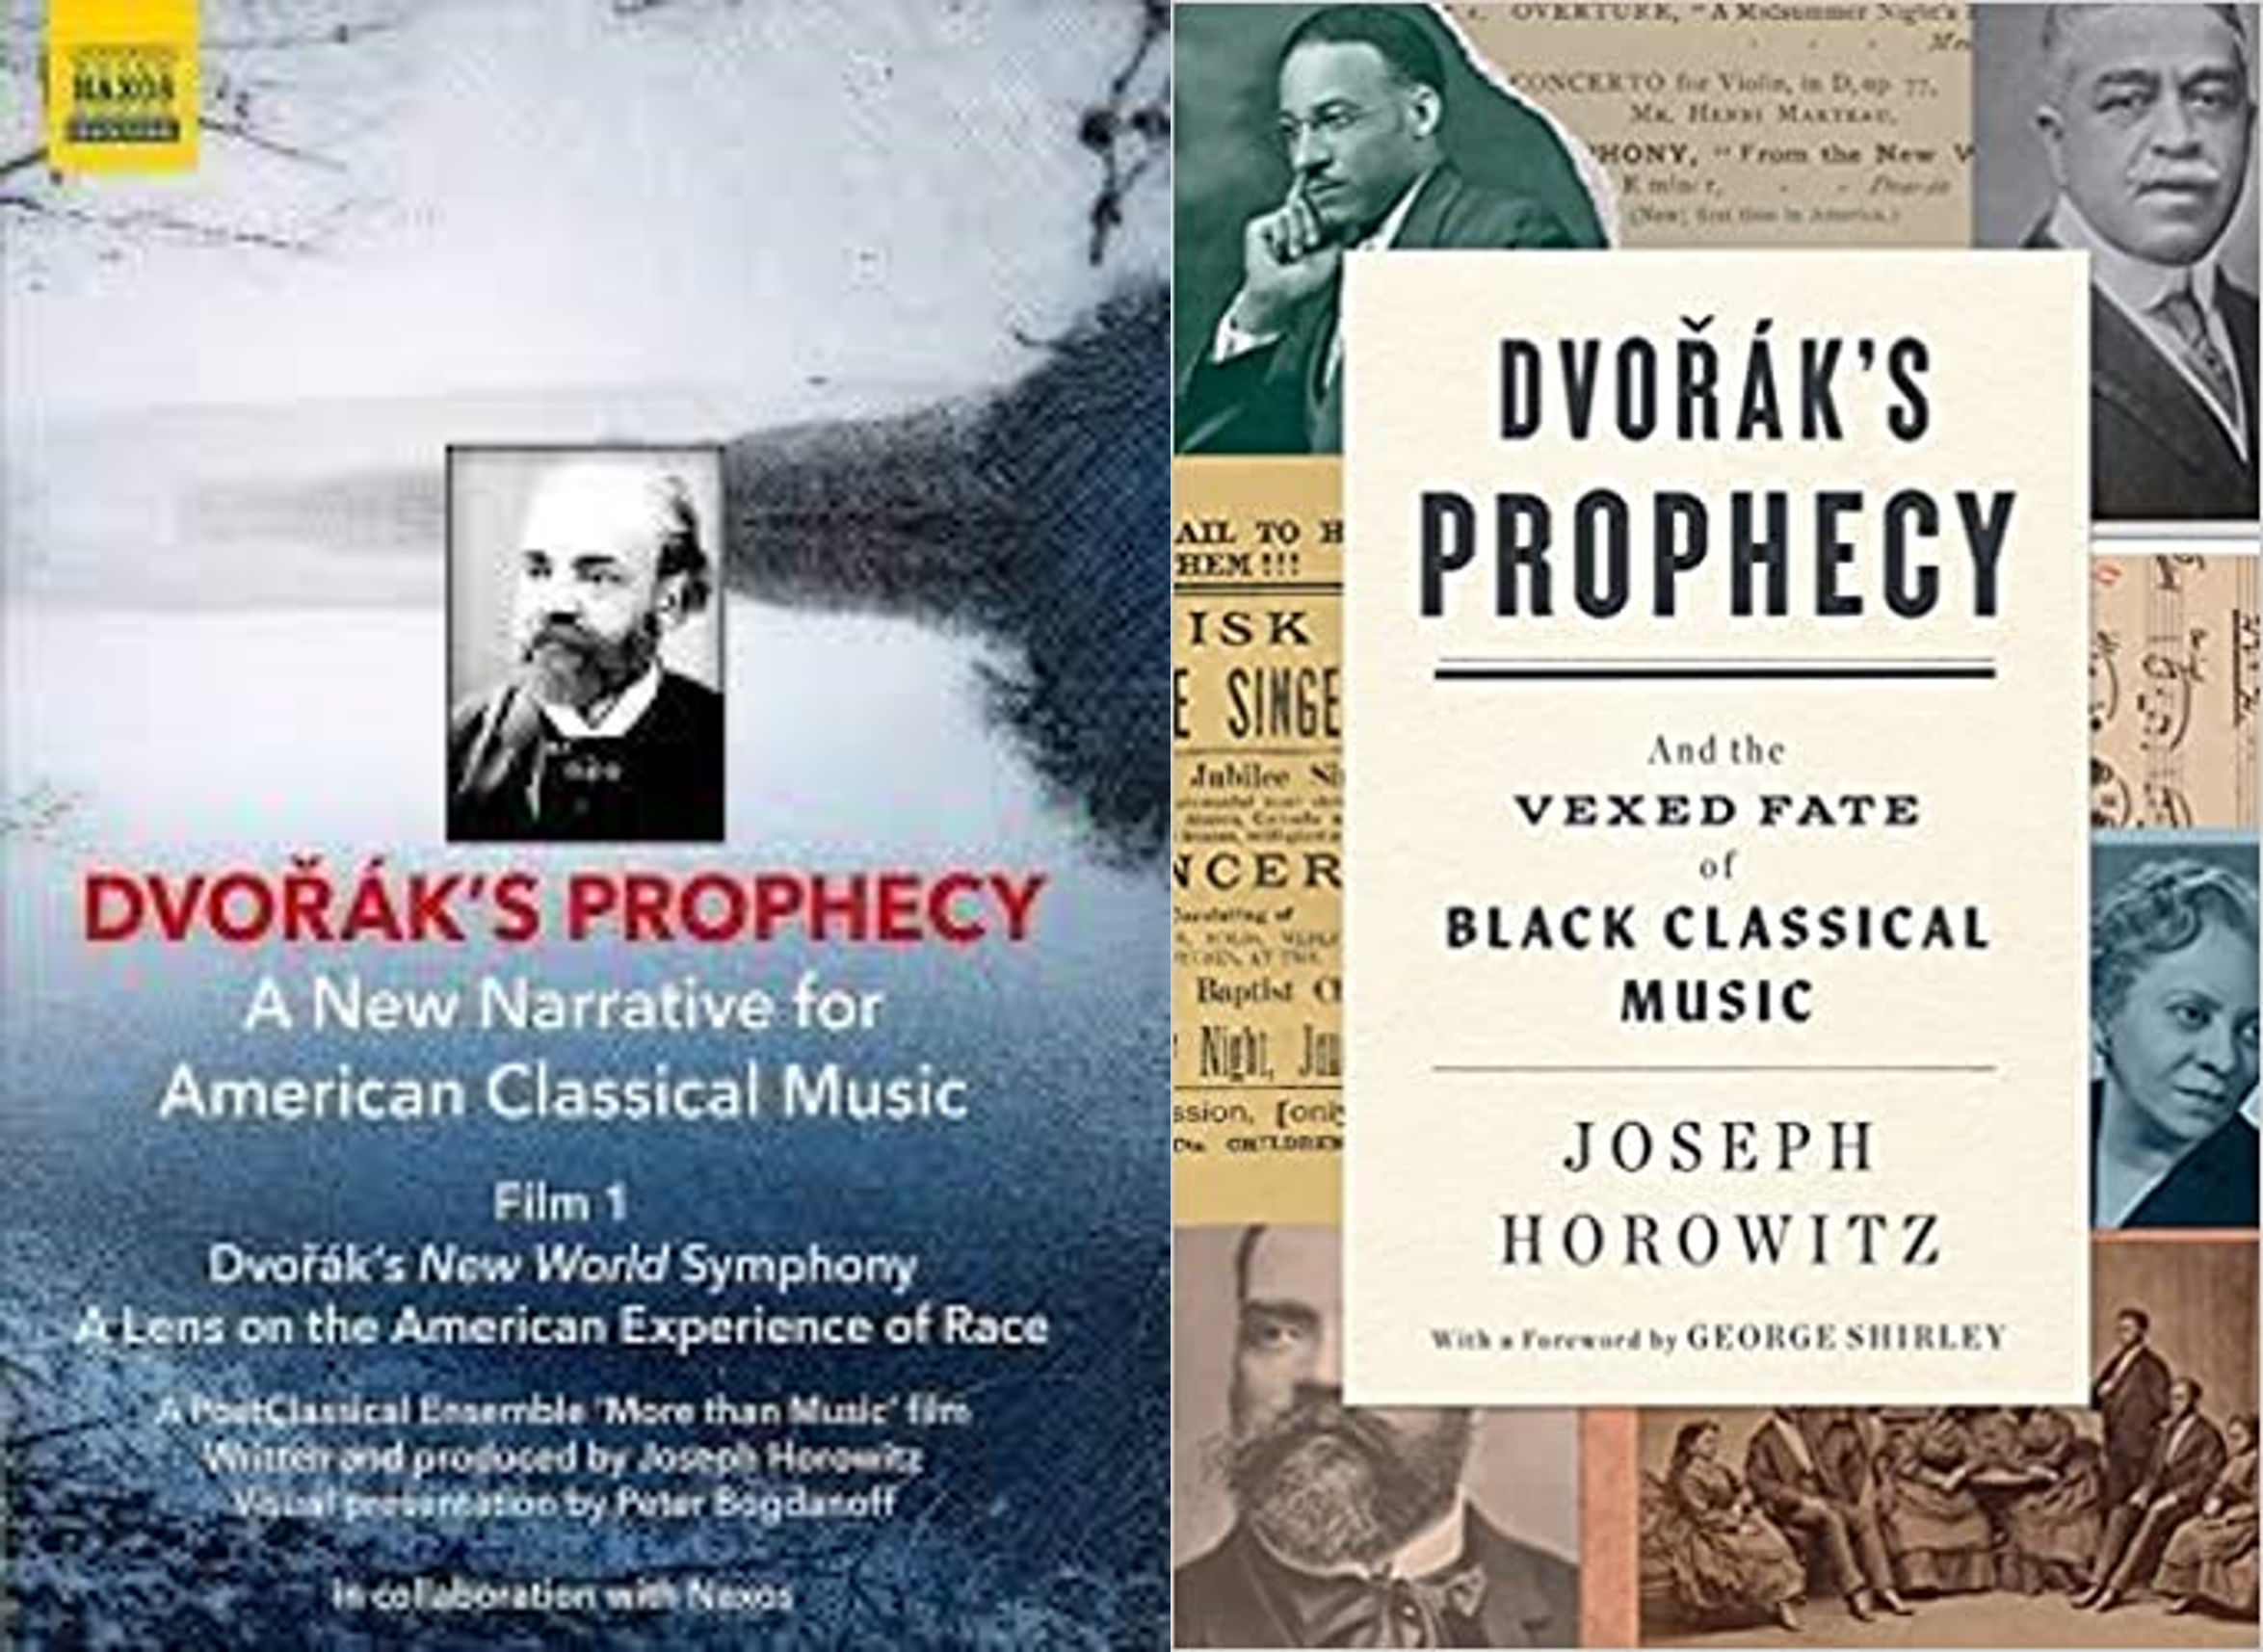 Covers of the new releases of Dvorak's Prophecy book by Joseph Horowitz and DVD by Post Classical Ensemble